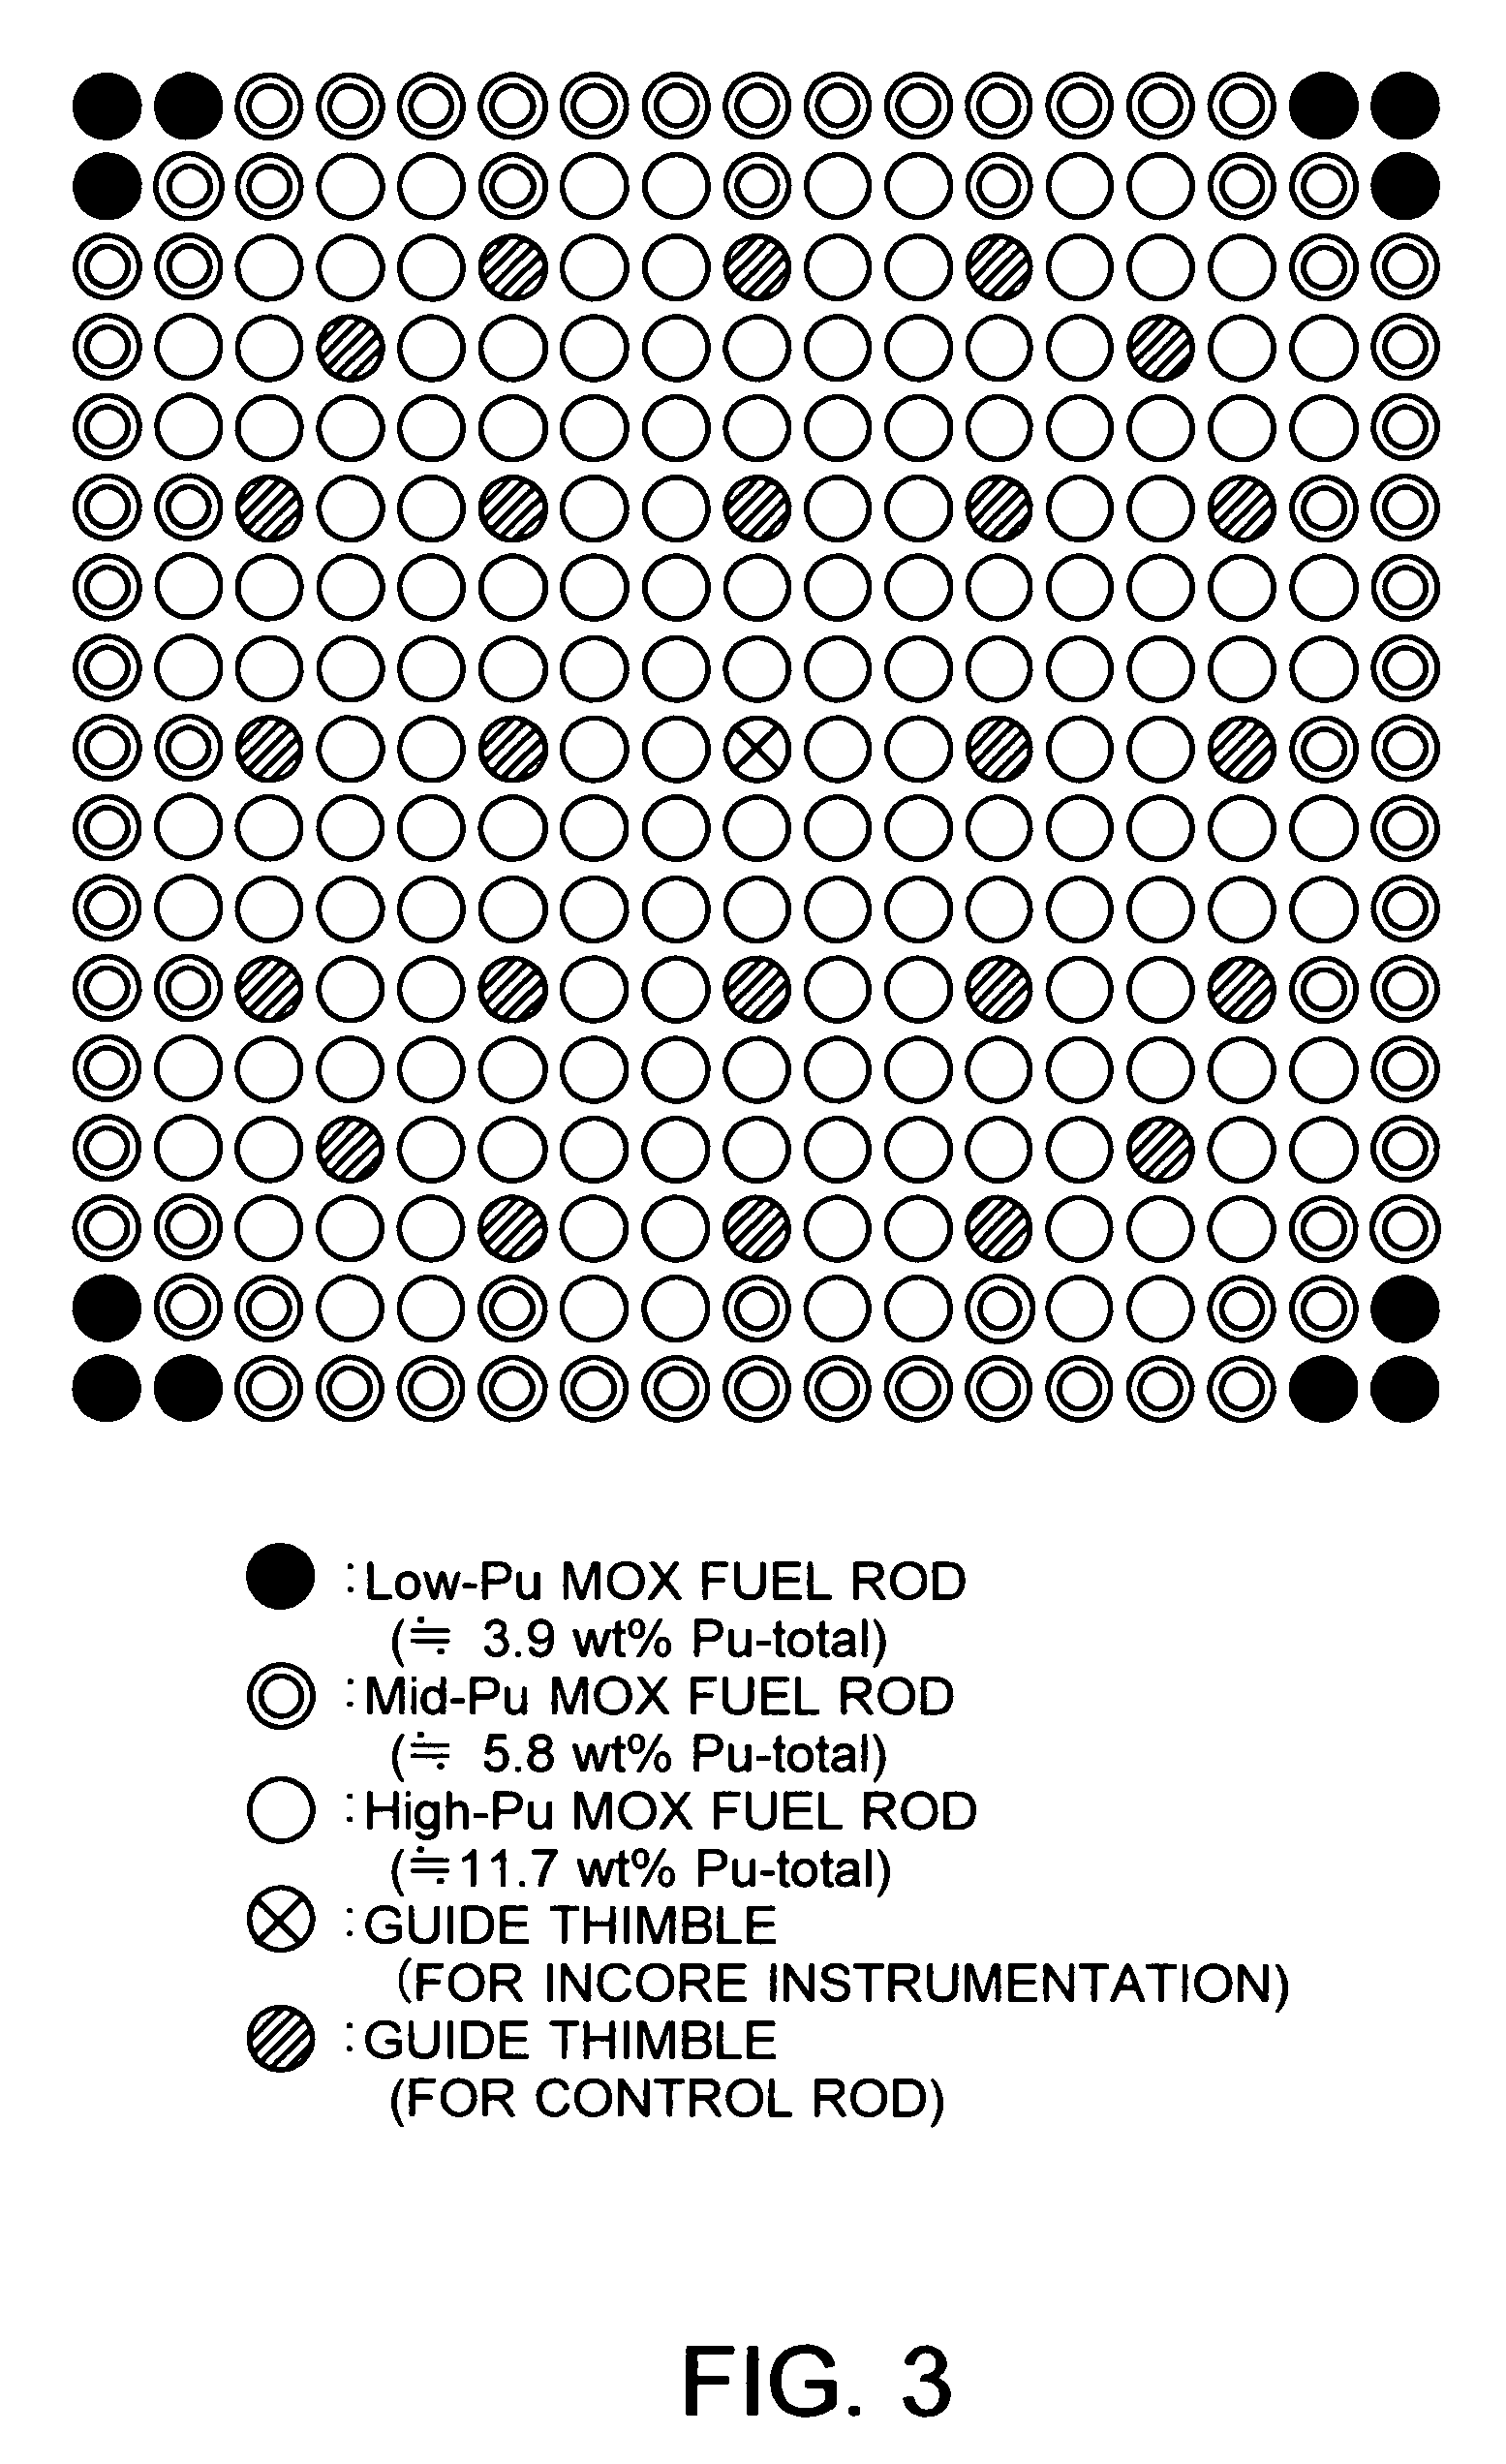 Mox fuel assembly for pressurized water reactors